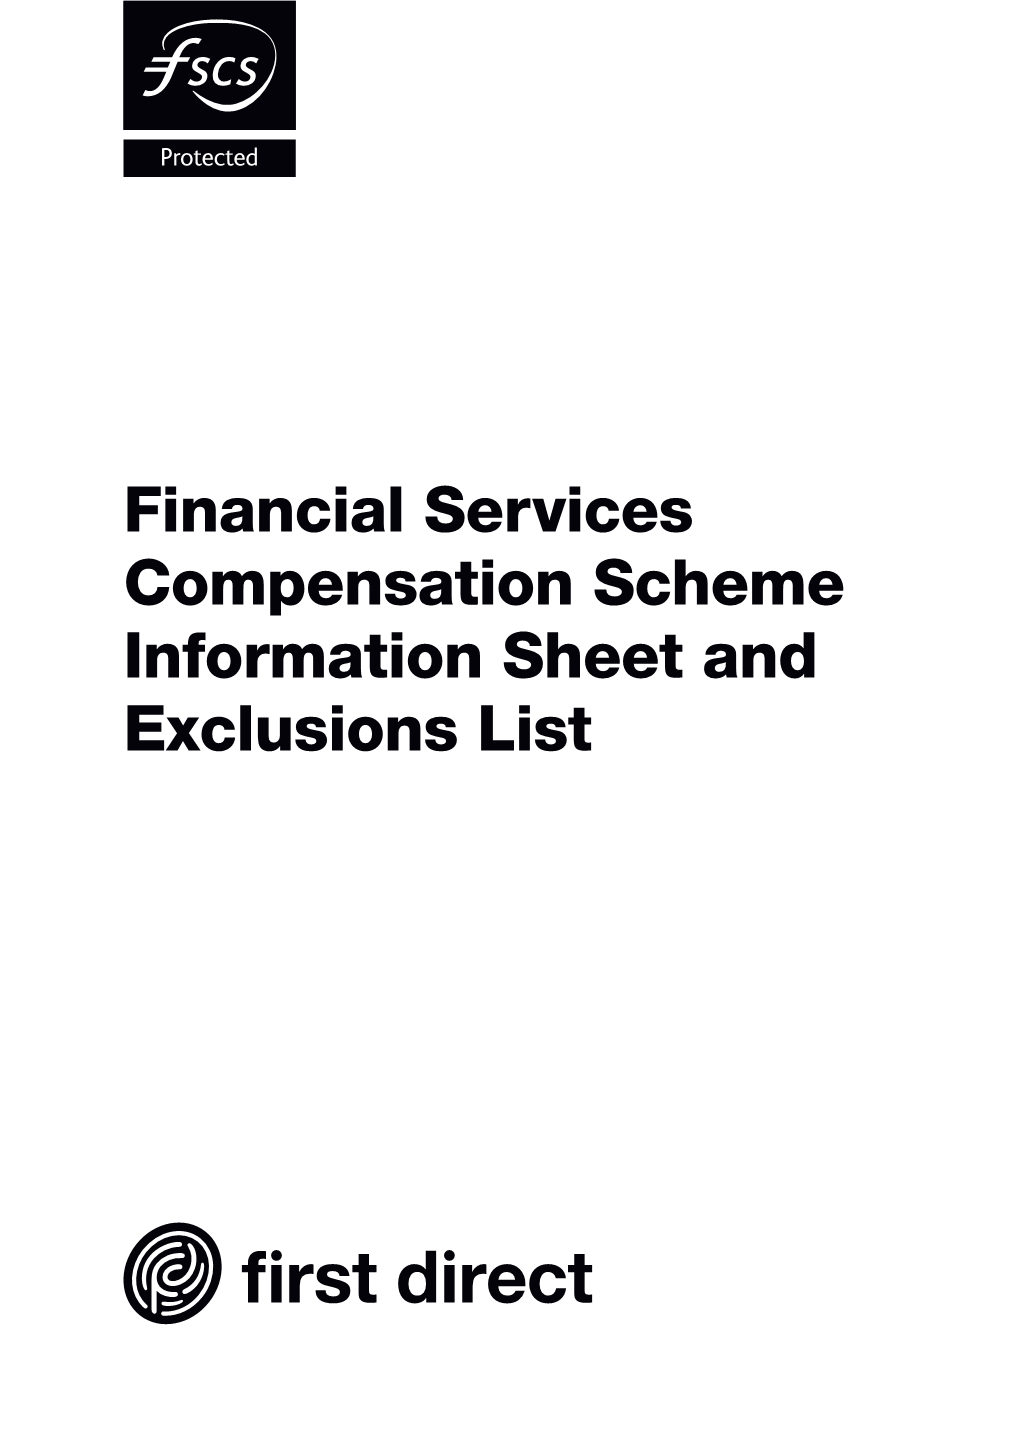 UK FSCS Information Sheet and Exclusions List